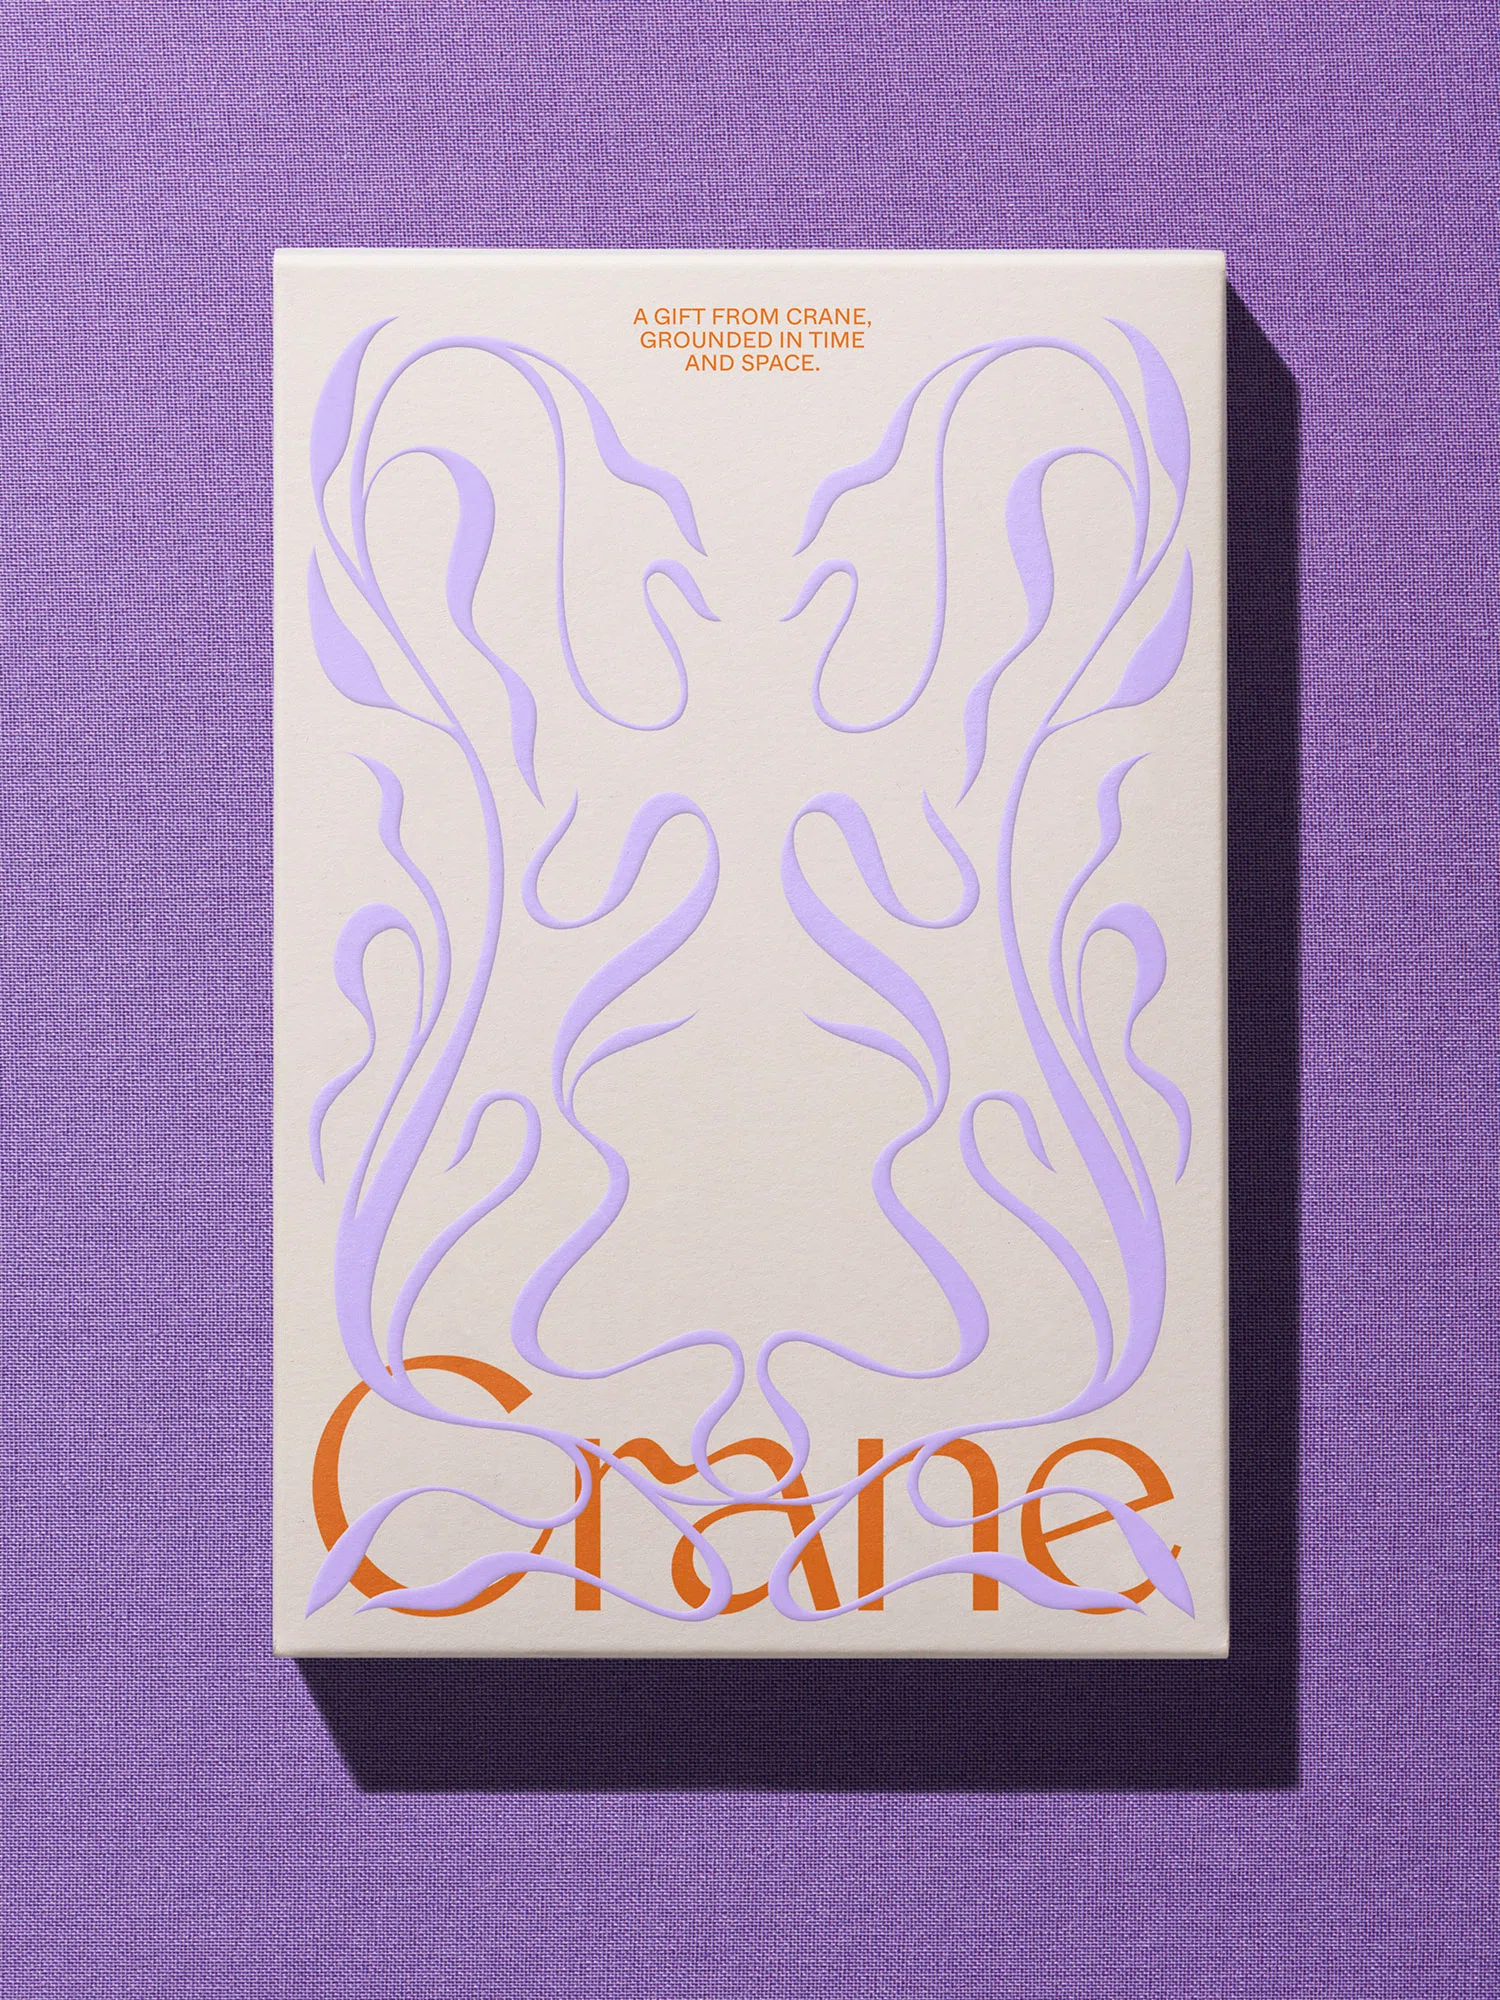 https://admin.itsnicethat.com/images/ZyXm8eXDYrCK0Cexj3Zy7endbM0=/197149/format-webp%7Cwidth-2880/crane_paper_rebrand_collins_graphic_design_itsnicethat7.jpg